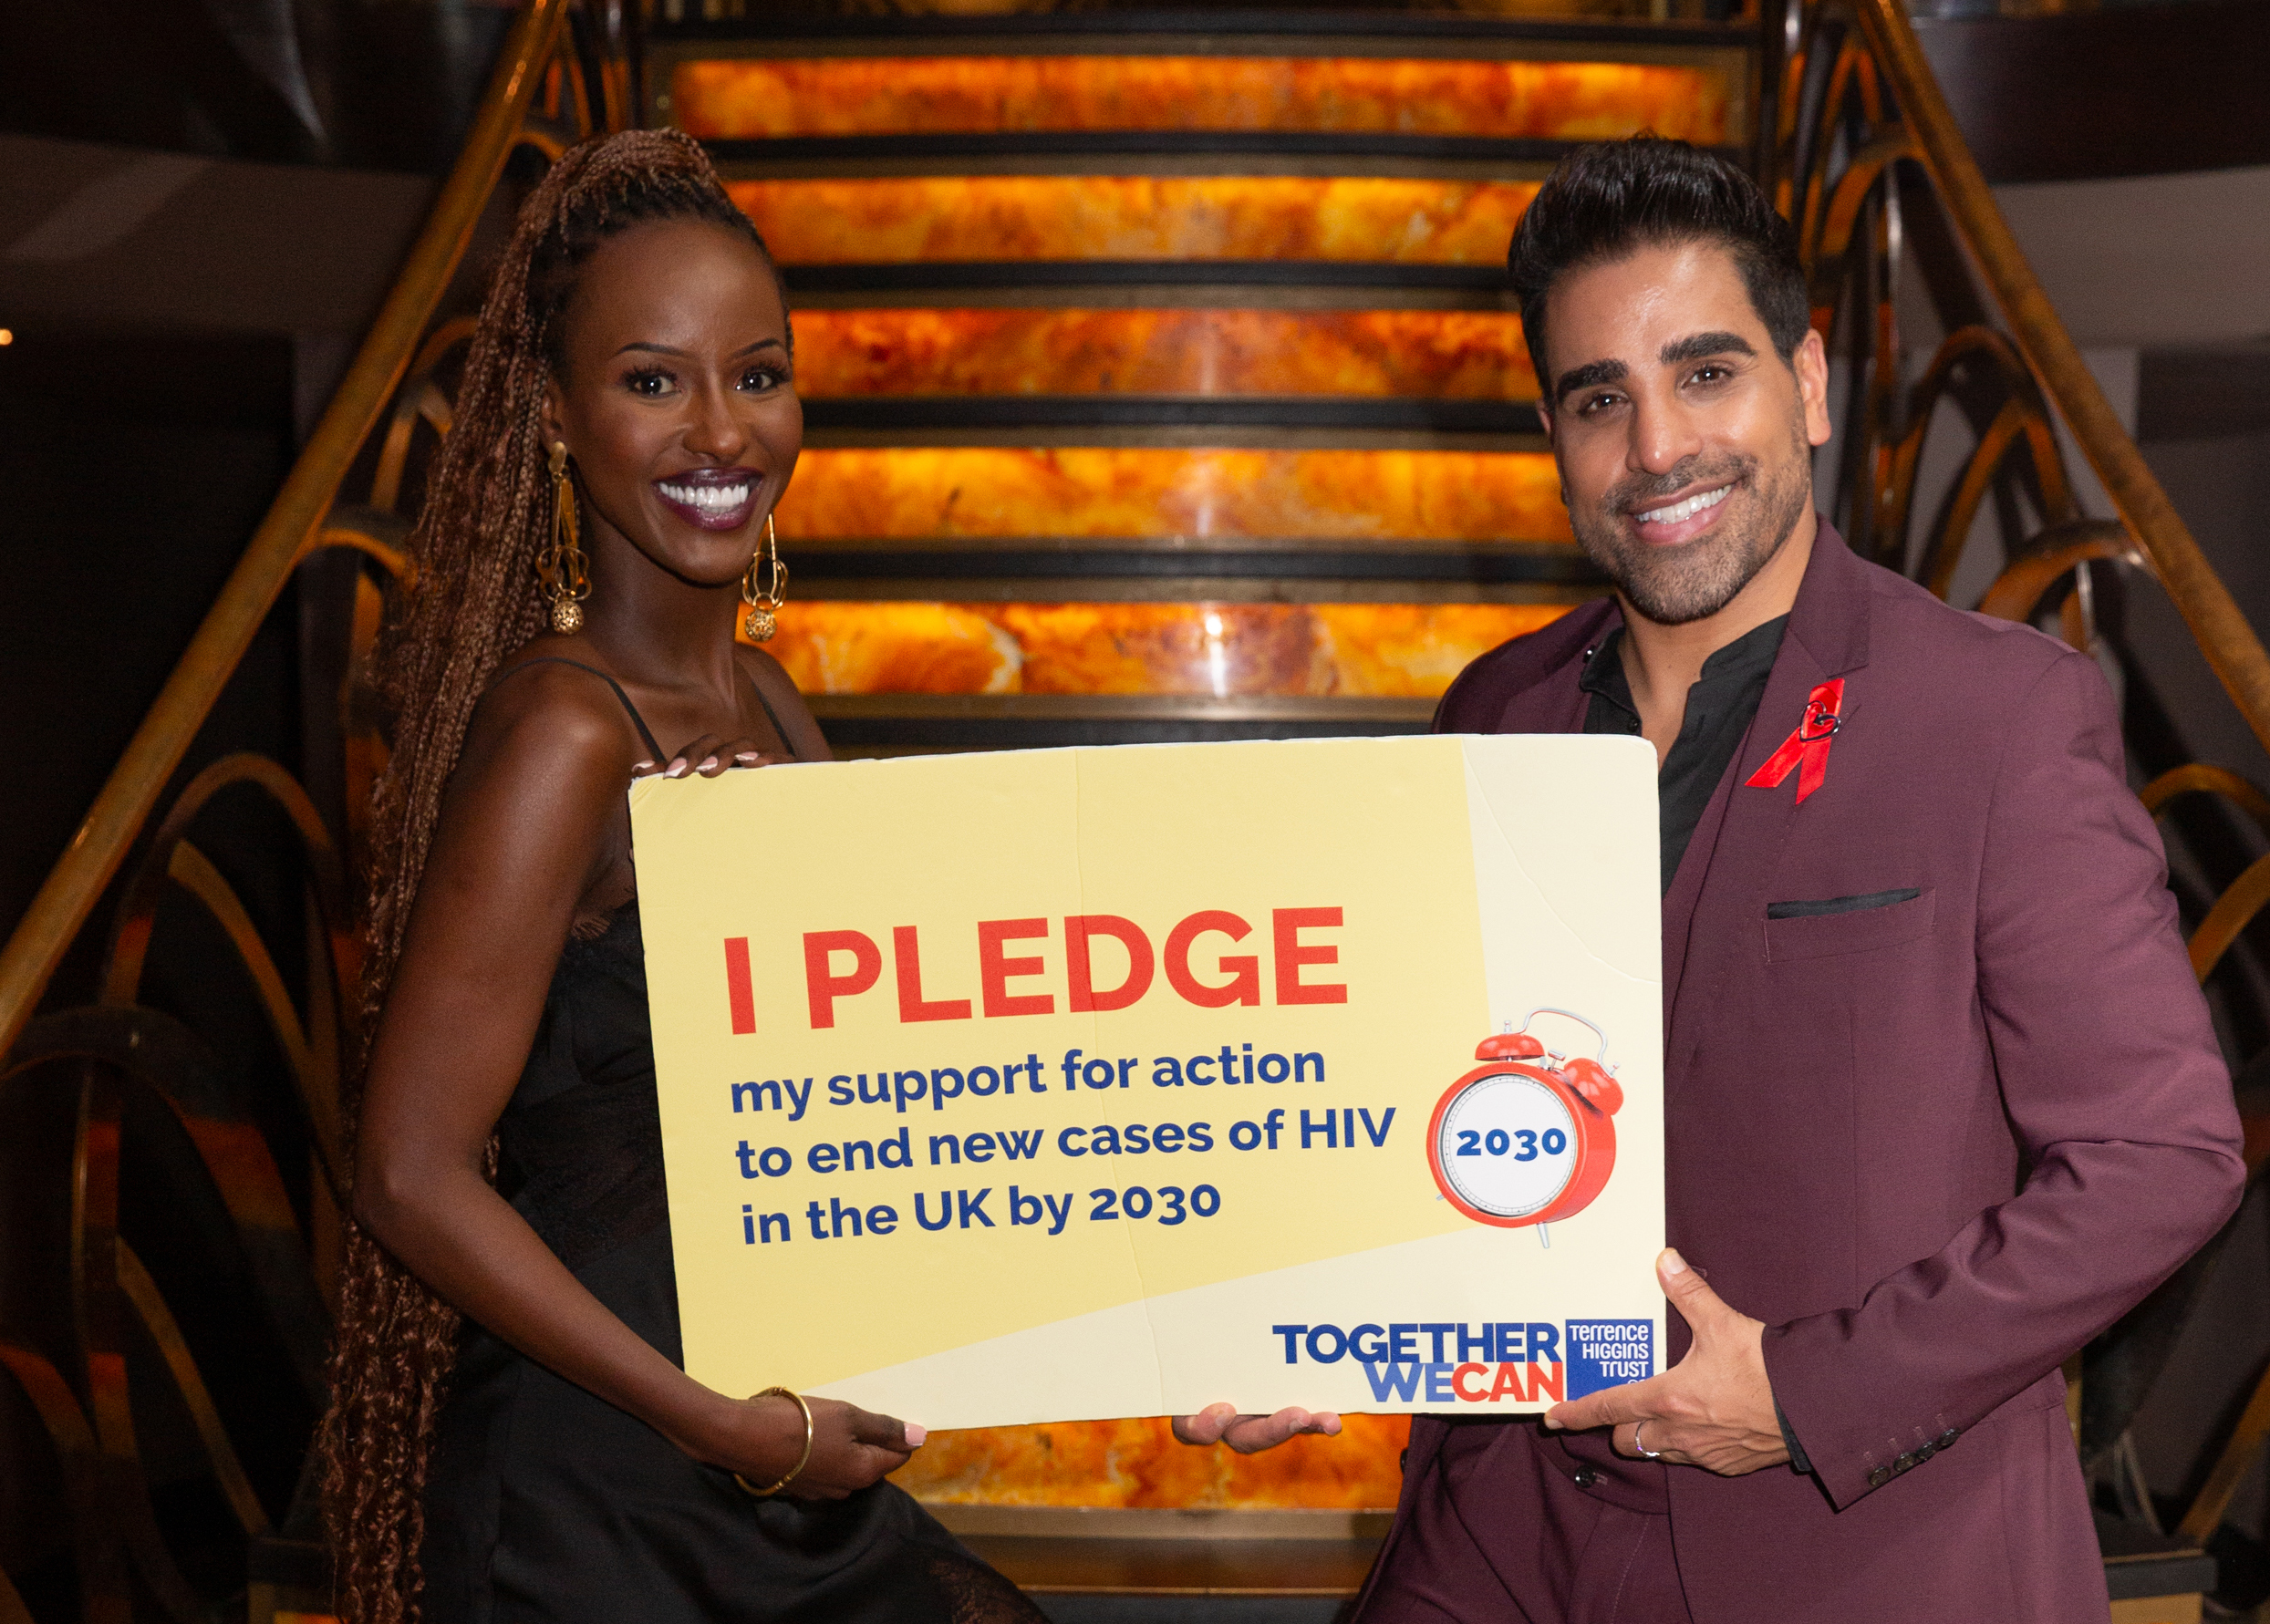 Sarah Mulindwa and Dr Ranj holding pledge to support for action to end new cases of HIV in the UK by 2030